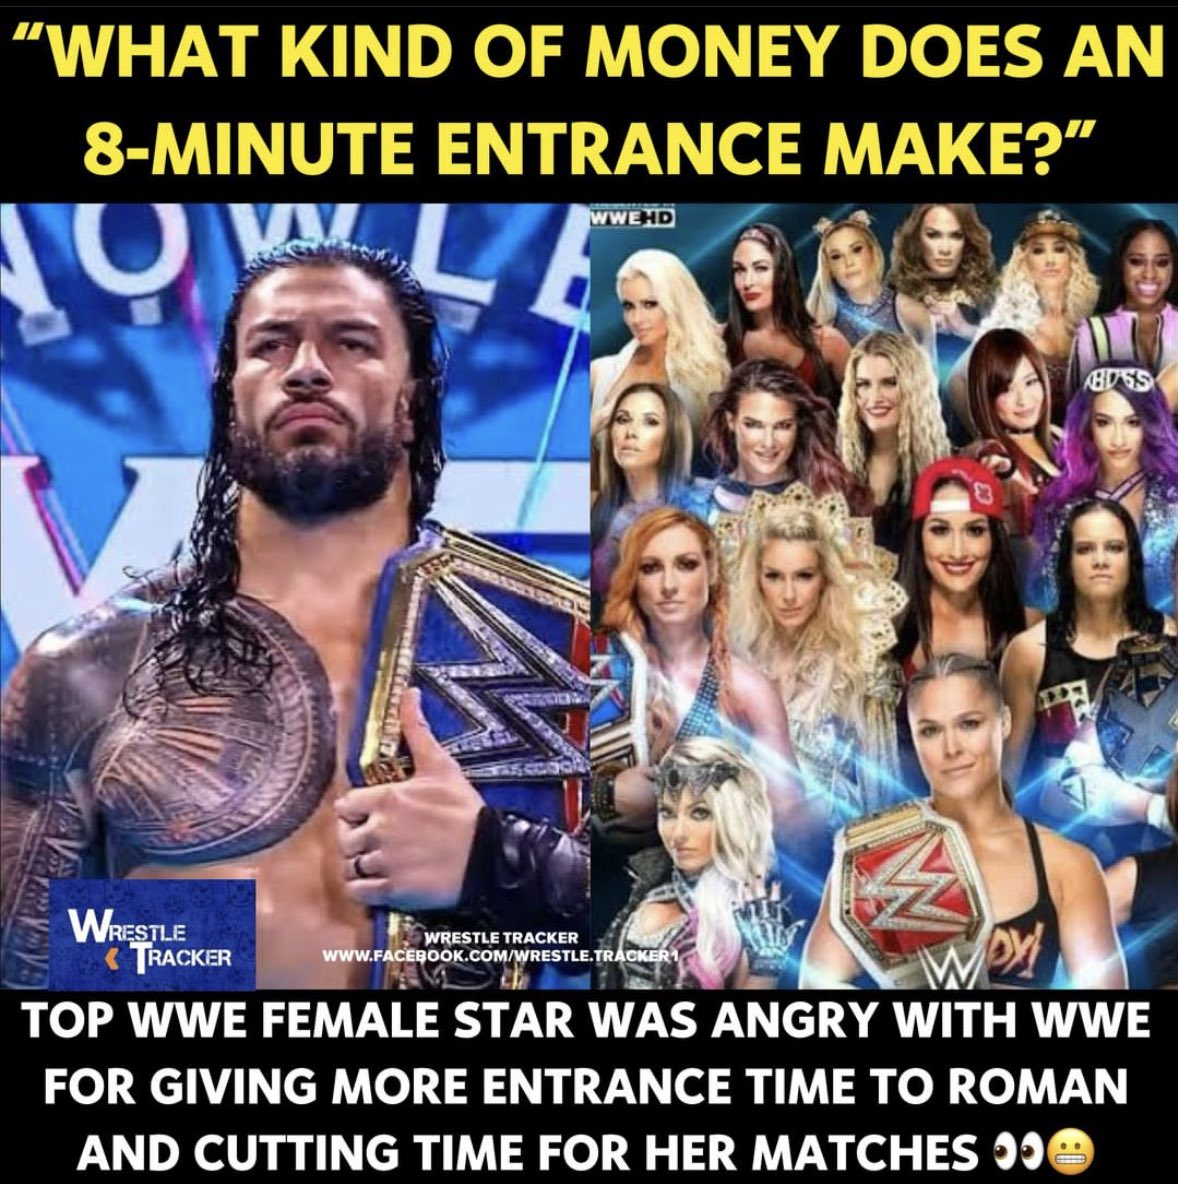 Roman Reigns targeted by top female star: “What type of money does an 8-minute entrance make?” 👉 bit.ly/3UDzFZM #RomanReigns #WWE